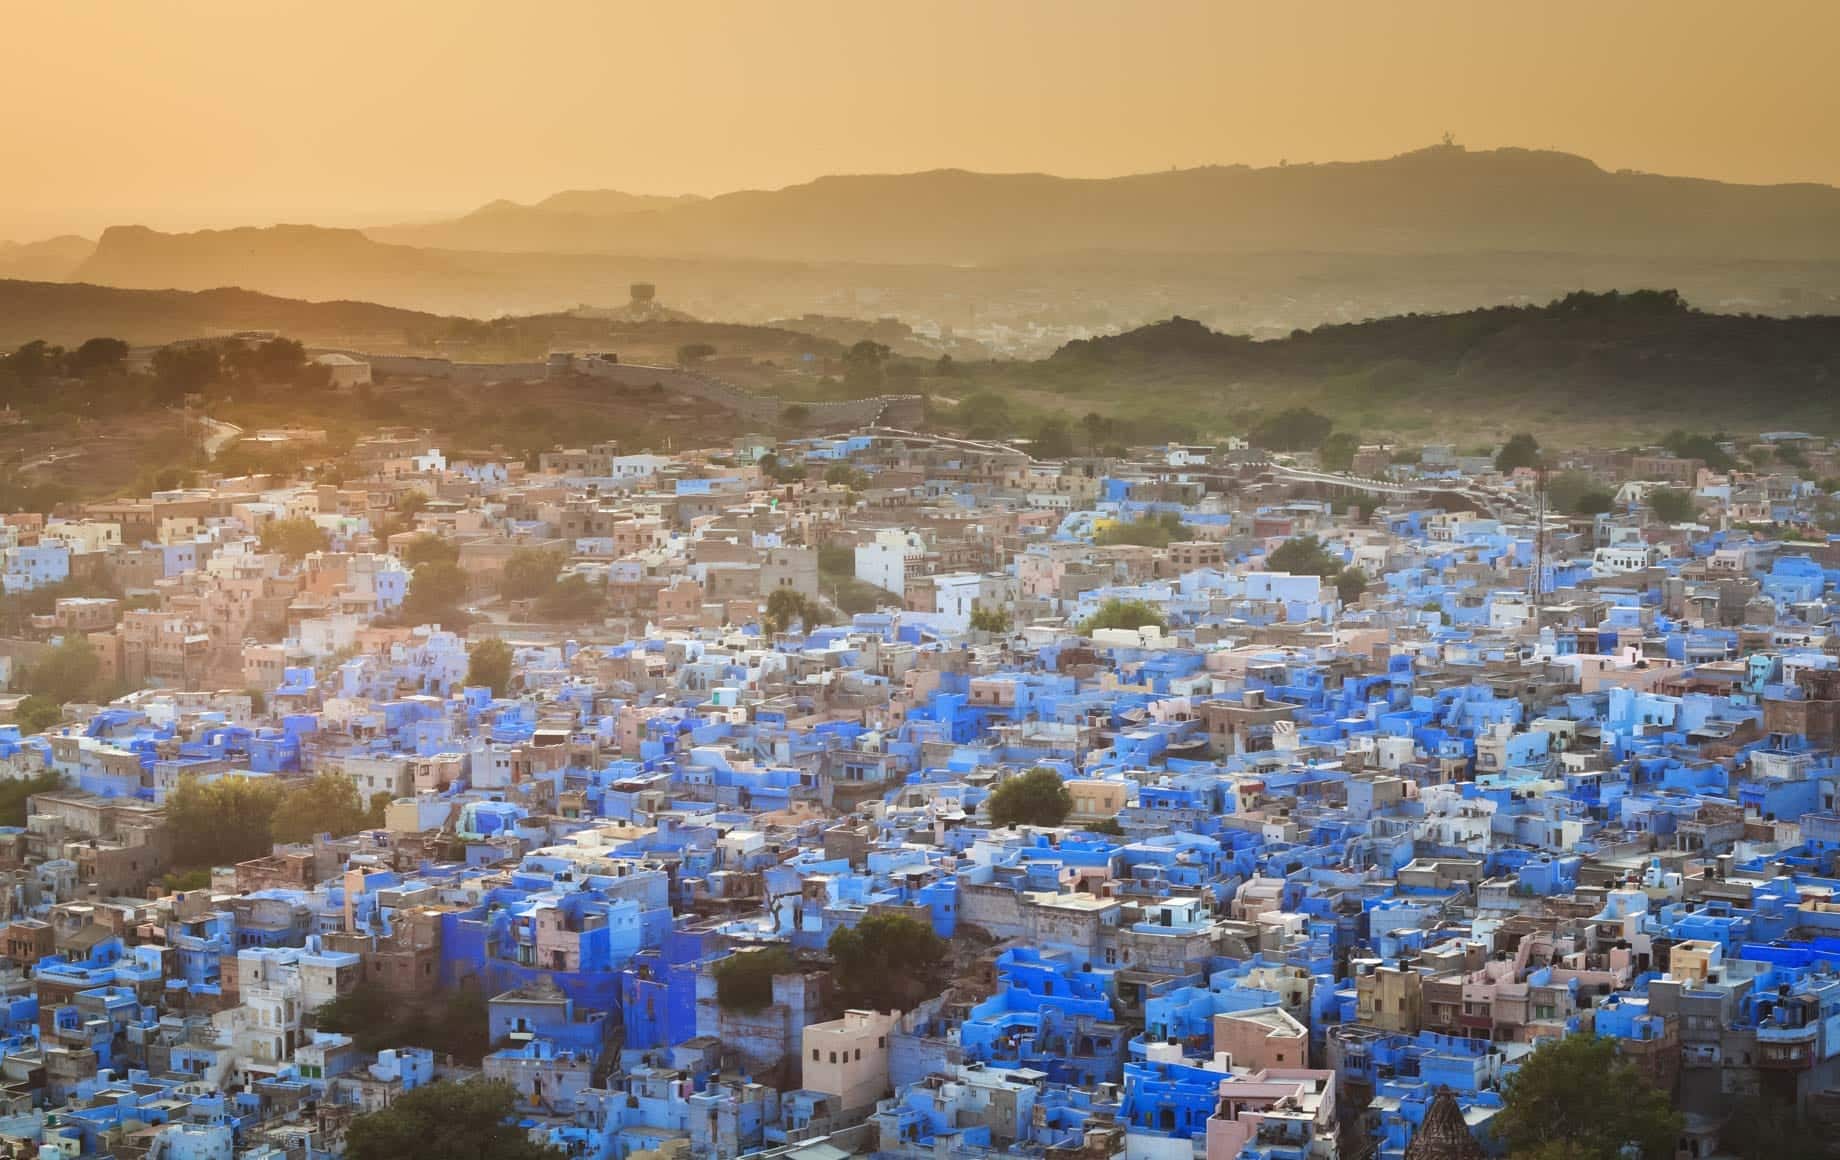 Jodhpur is a city in the Thar Desert of the northwest Indian state of Rajasthan